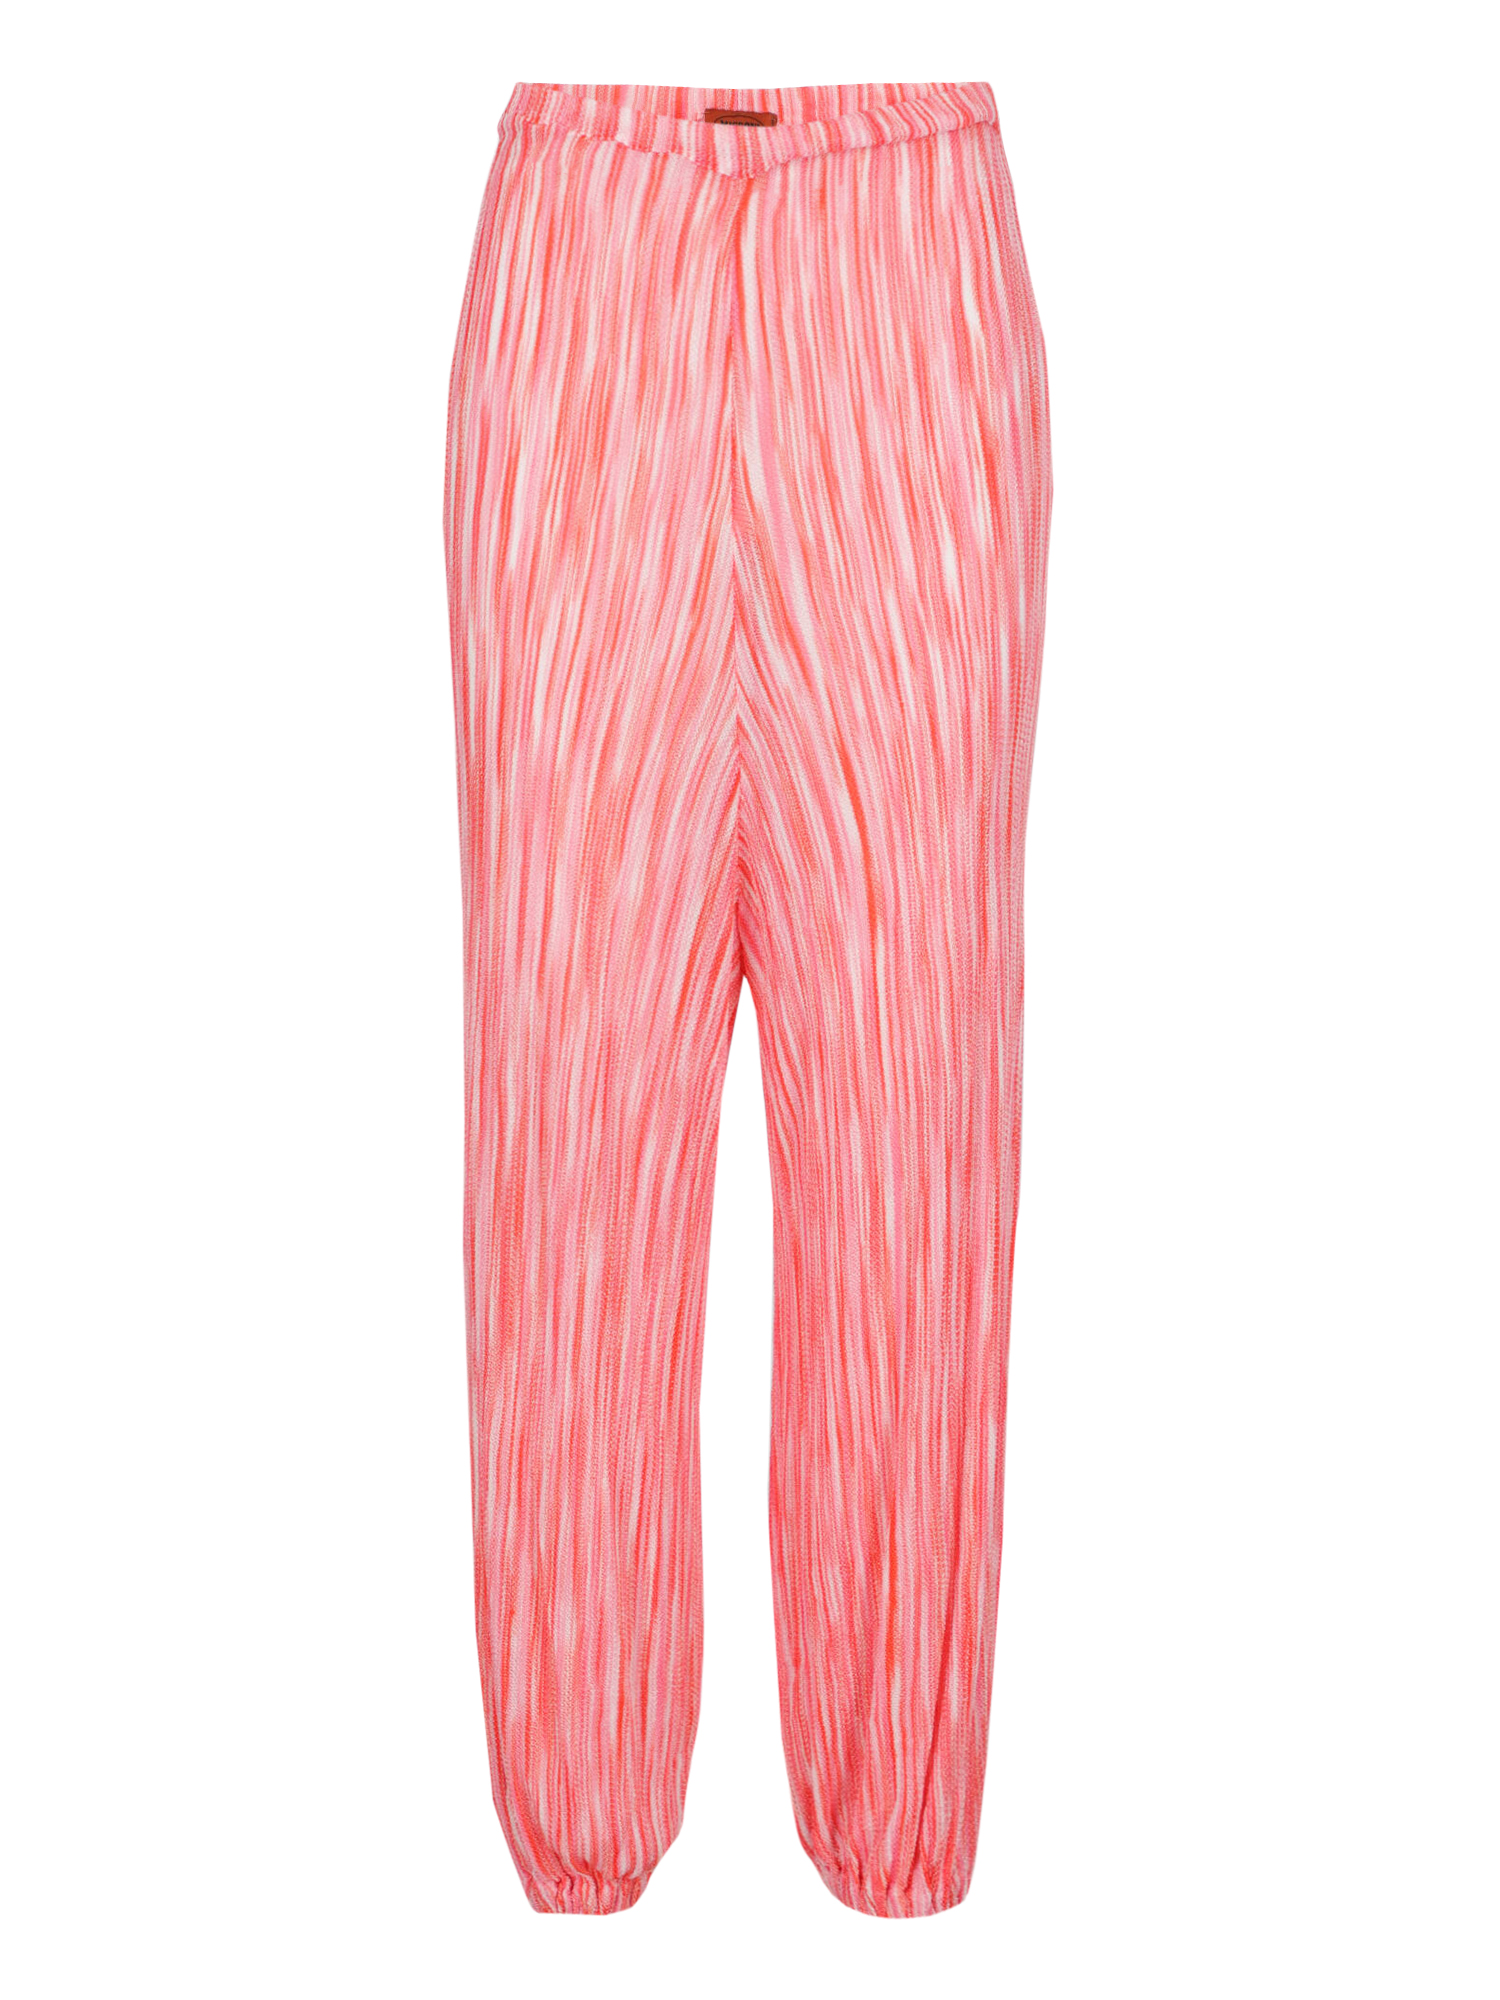 Condition: Very Good, Striped Synthetic Fibers, Color: Pink - S - IT 40 -